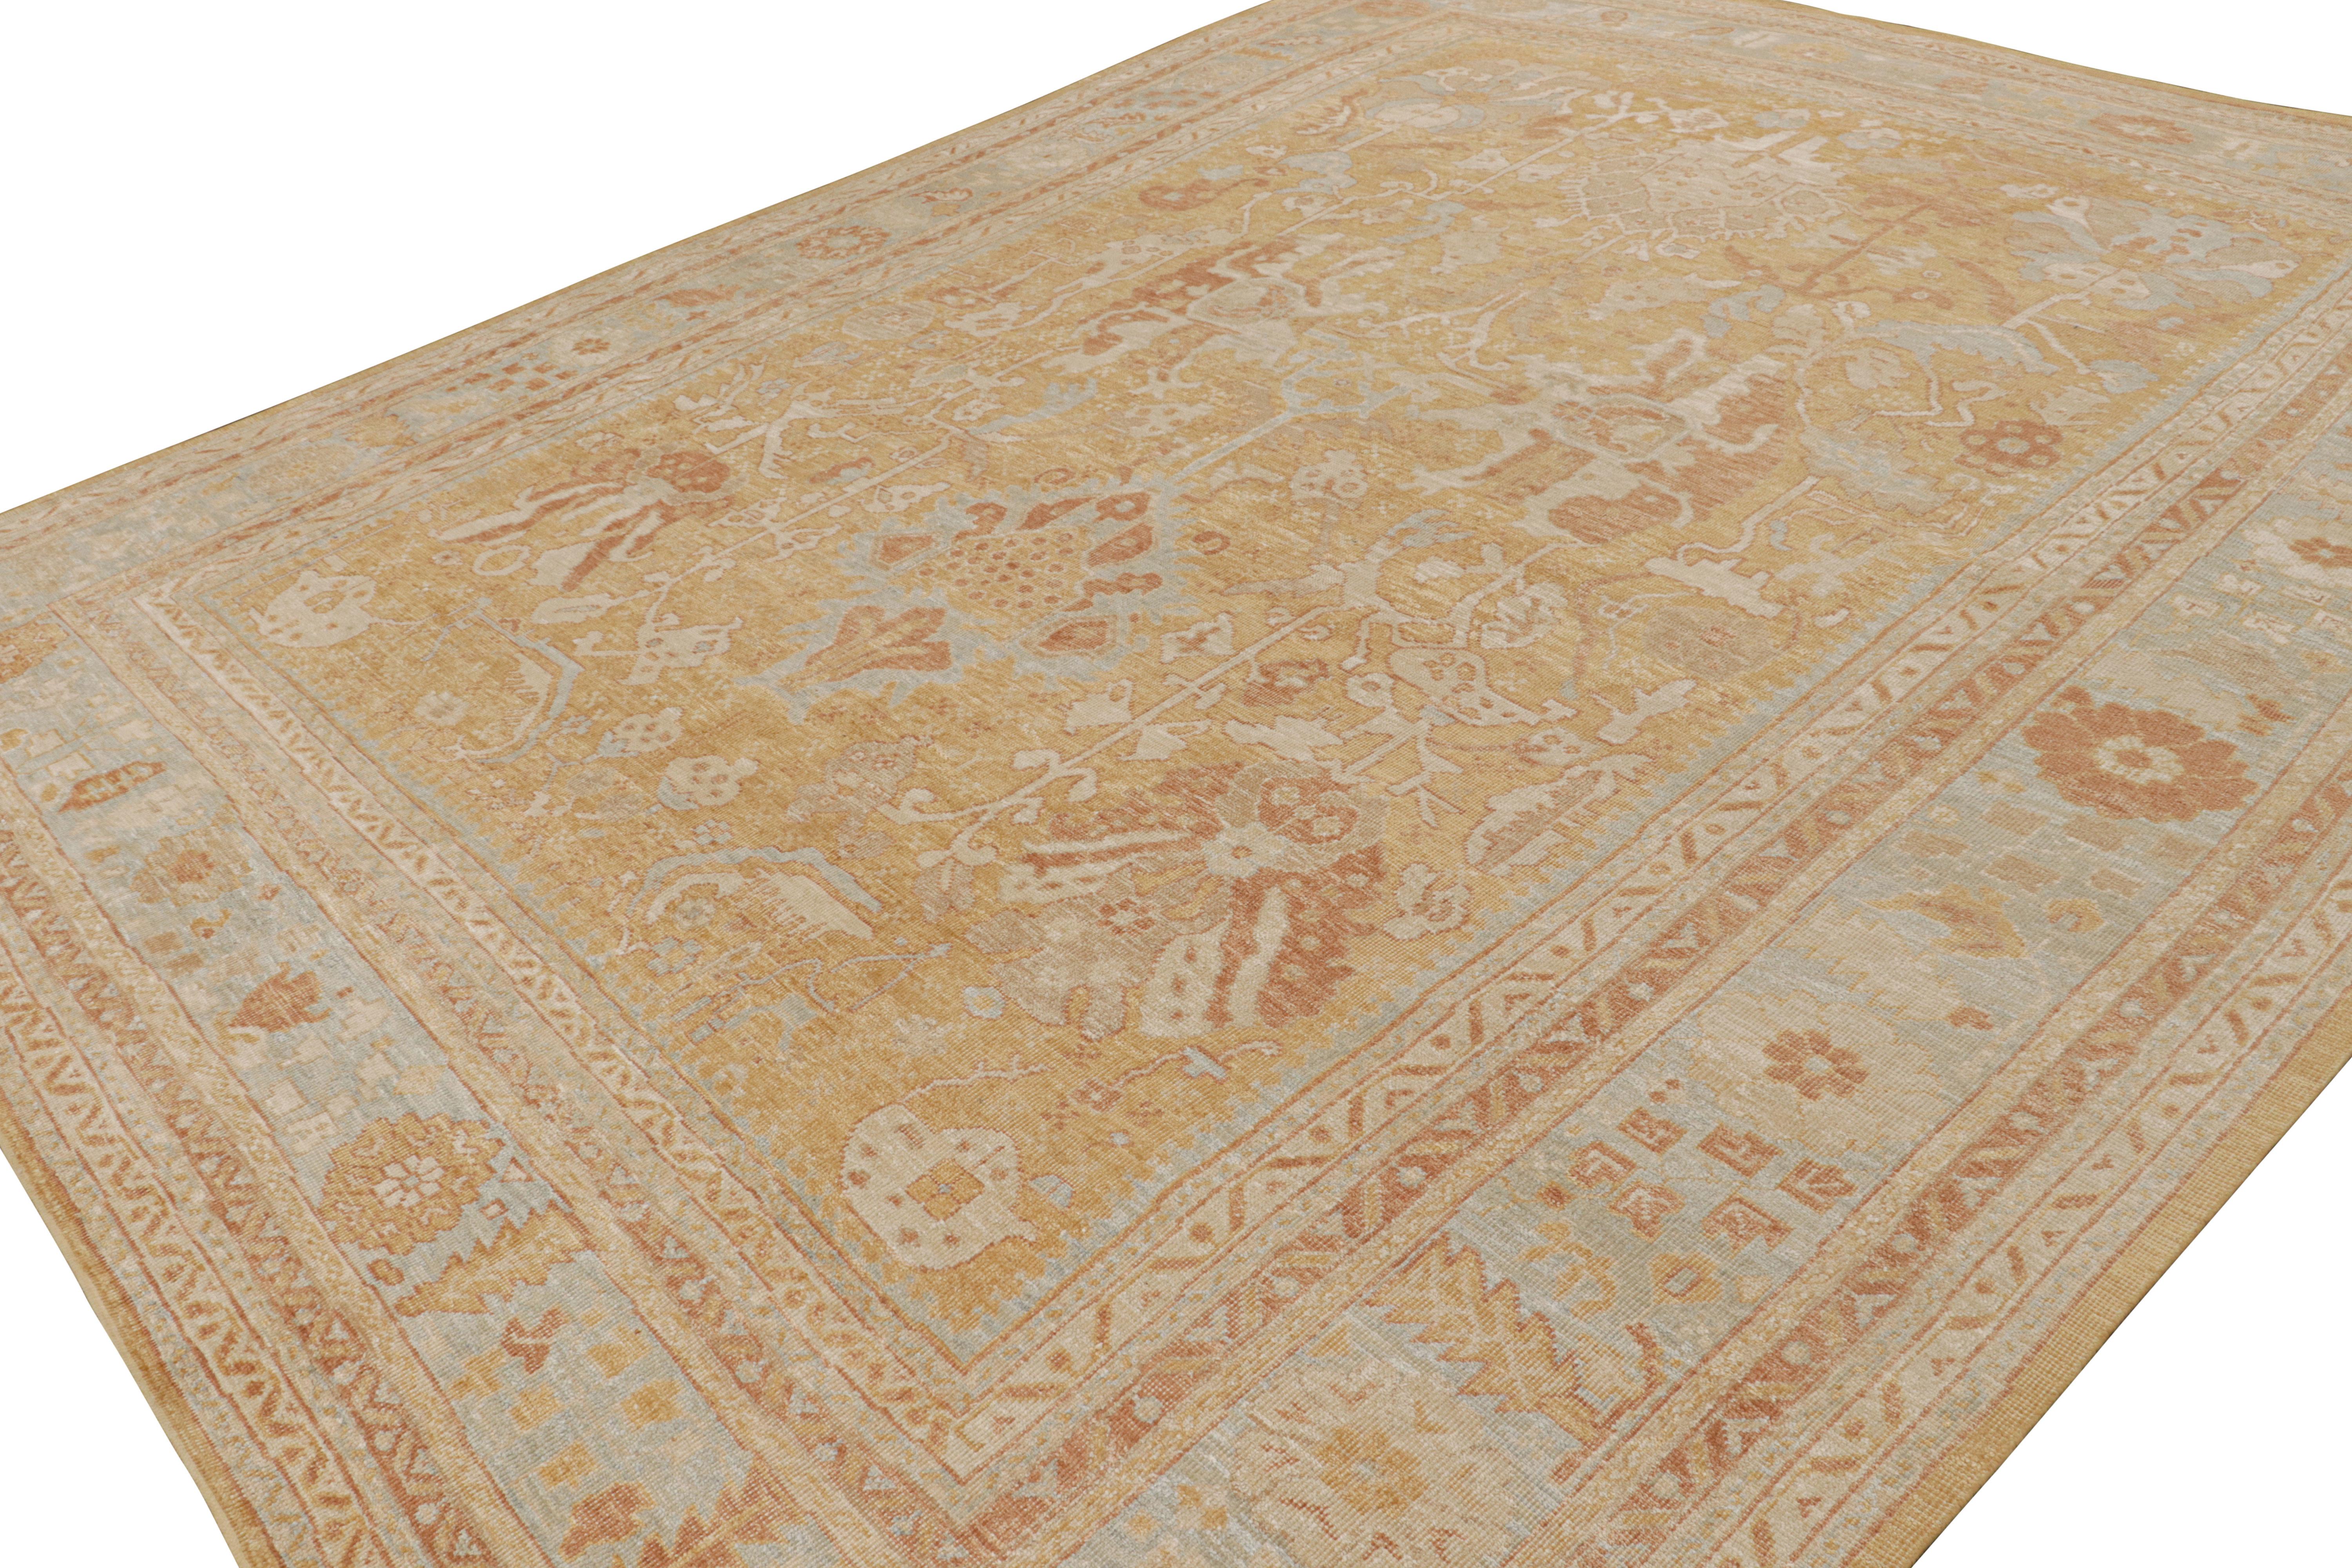 This 12x15 rug from the Modern Classics Collection features a gold field, blue and beige-brown borders underscore geometric-floral patterns keeping with the Oushak style. 

On the design: 

Connoisseurs will admire that this rug is made with a new